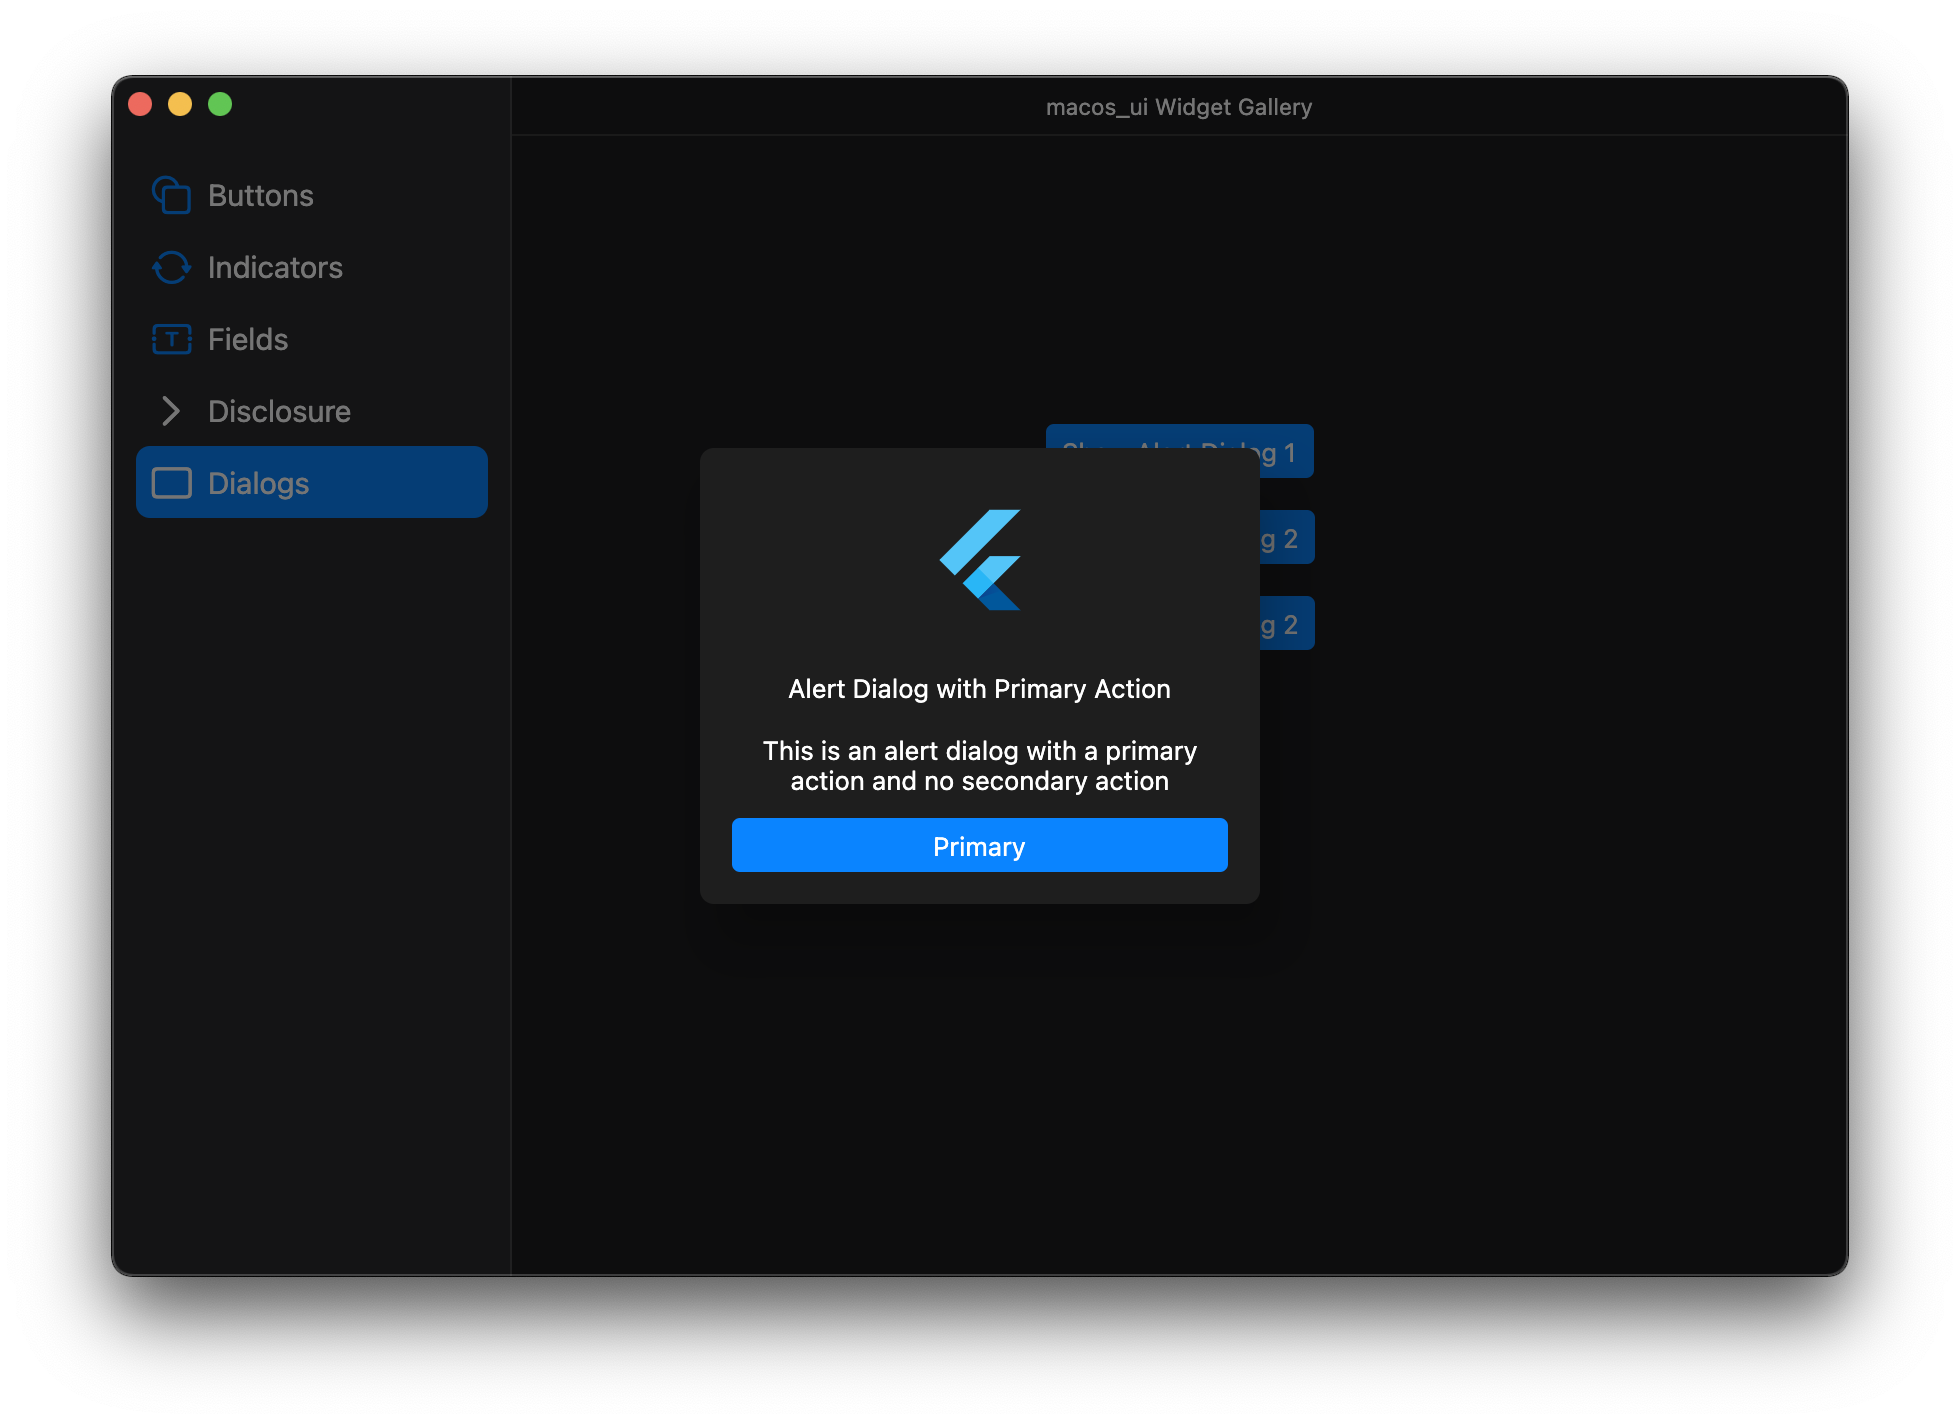 Flutter widgets and themes implementing the current macOS design language